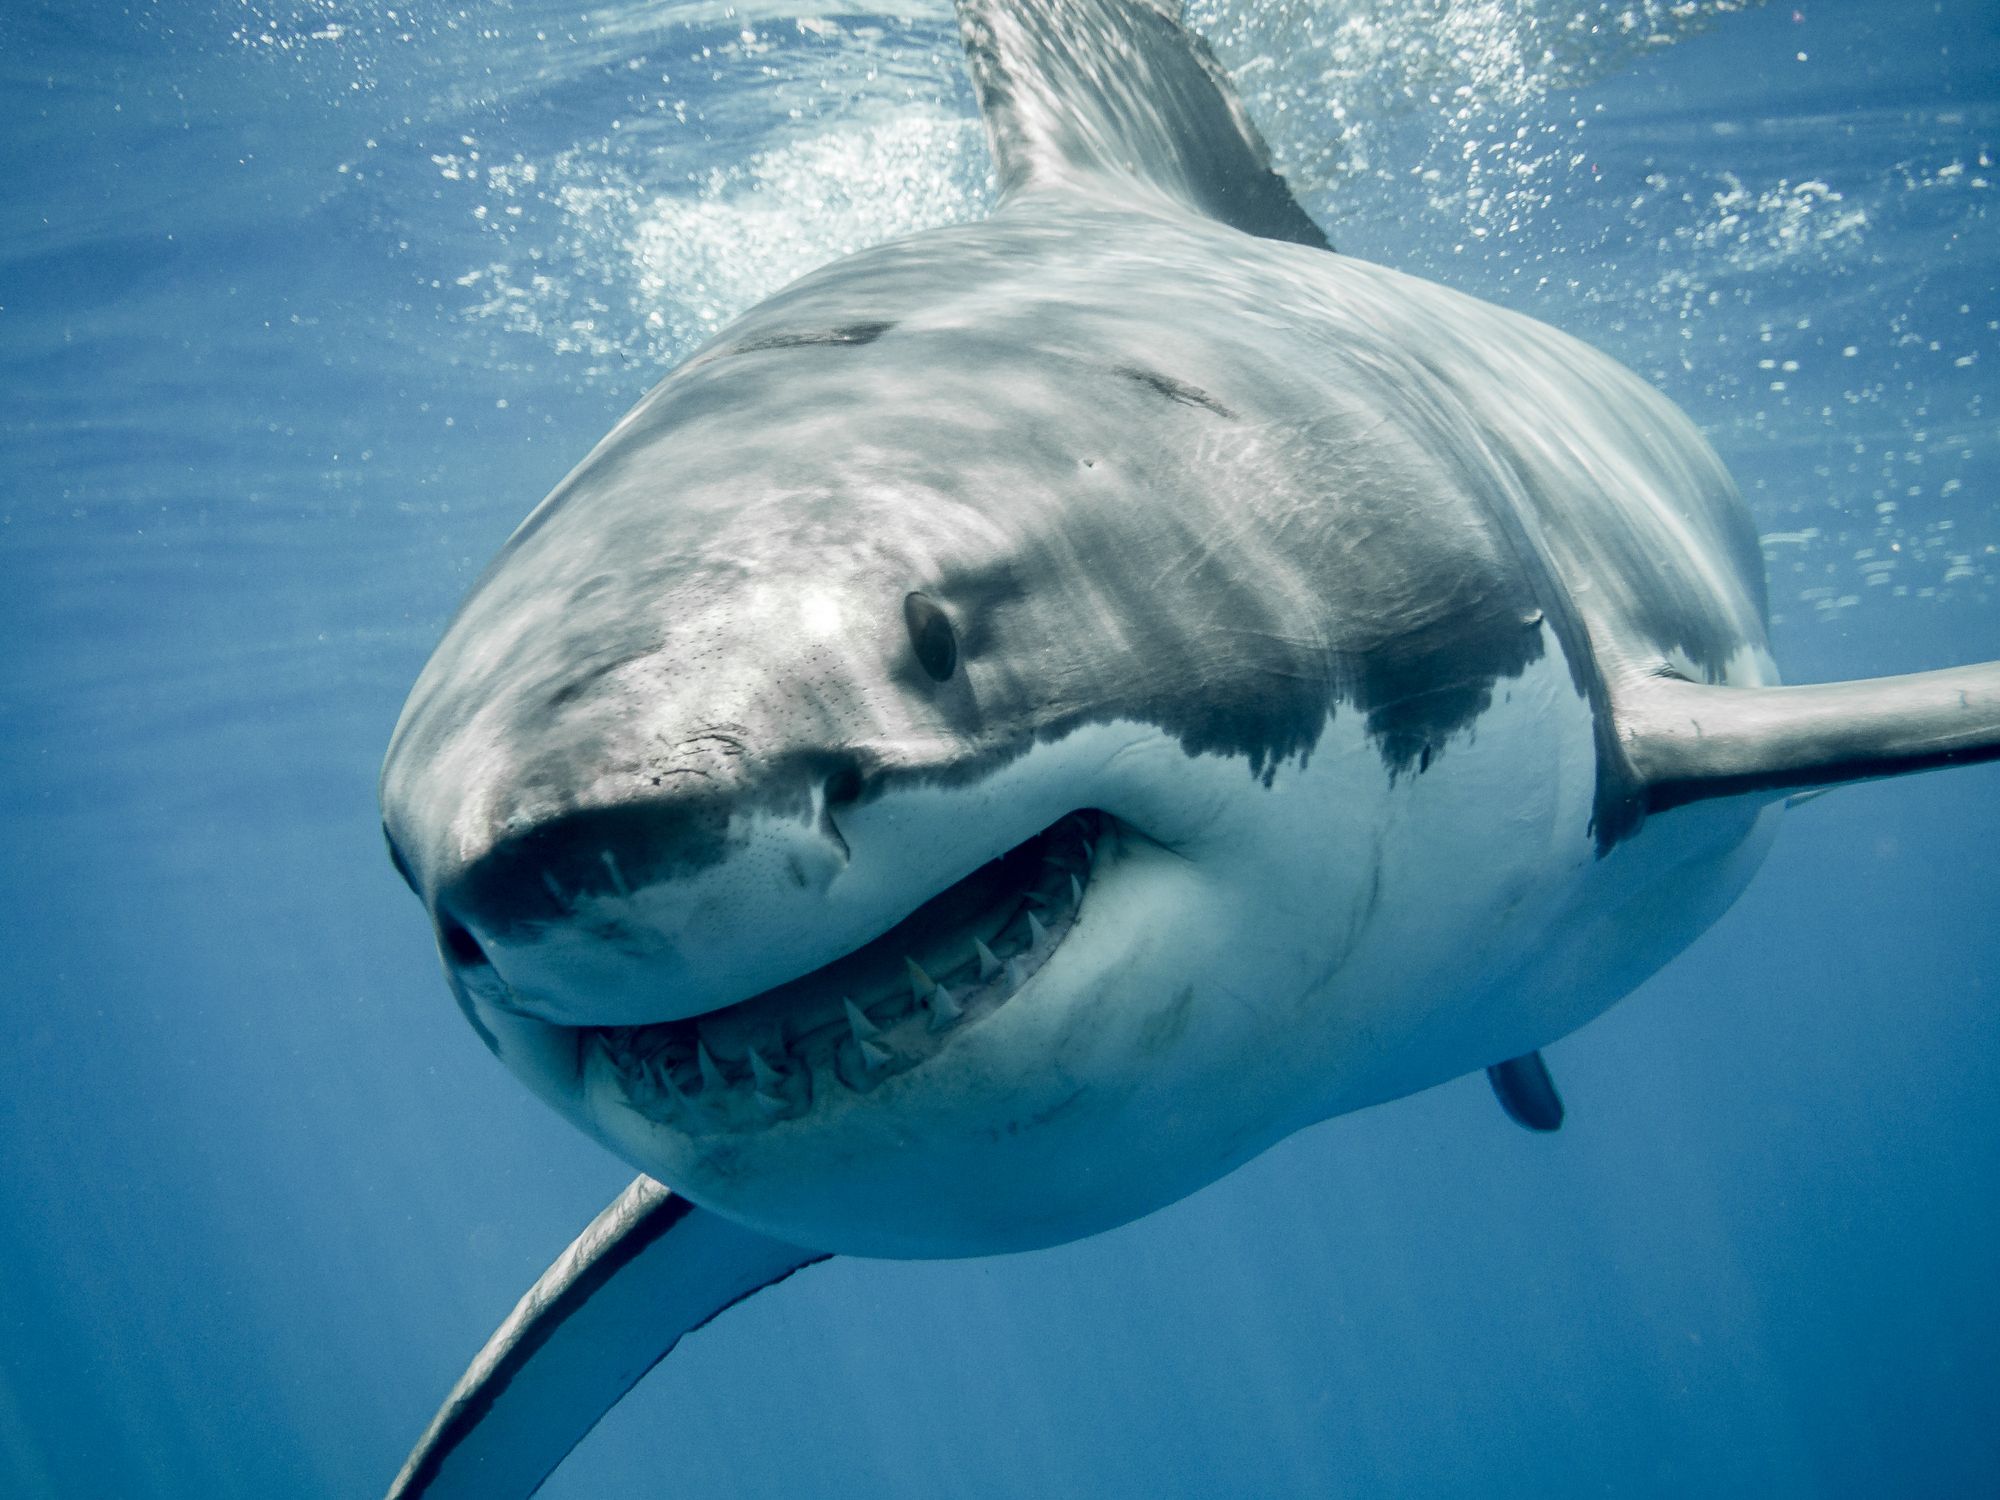 Deep Blue, the Massive, 20ft-long Great White Shark Thought to Be Biggest  on Record, Spotted Off Hawaii Coast